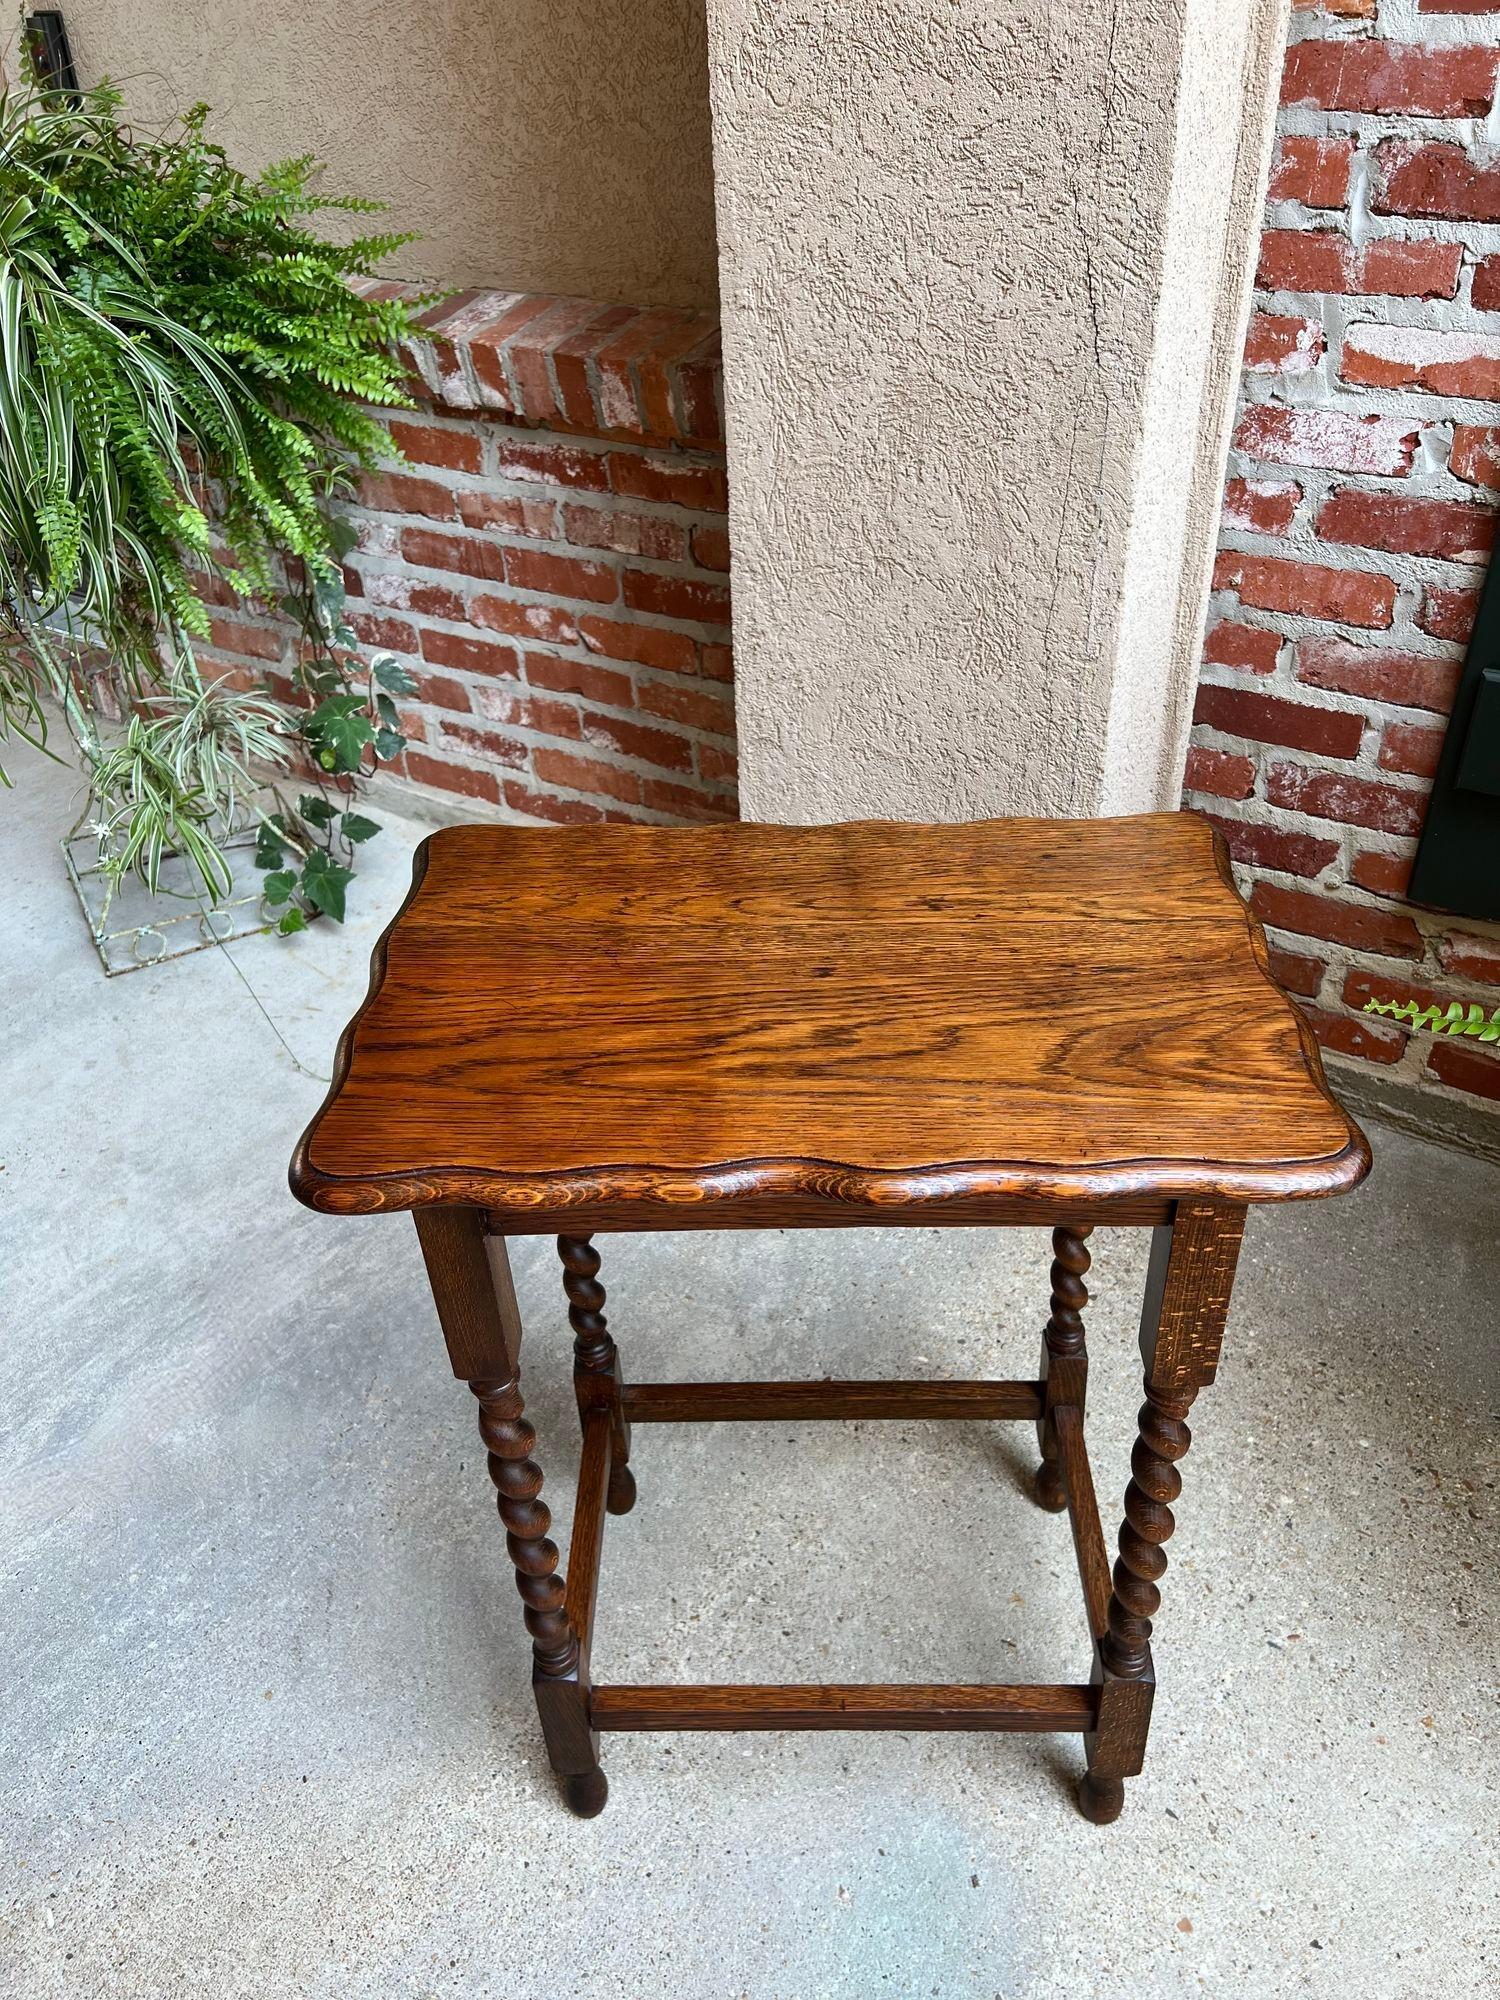 Antique English Oak End Side Table Barley Twist Scalloped Pie Crust Edge.

Direct from England, with classic English style, a lovely antique English oak side or lamp table! The scalloped “pie crust” beveled edge table top has gorgeous tiger oak